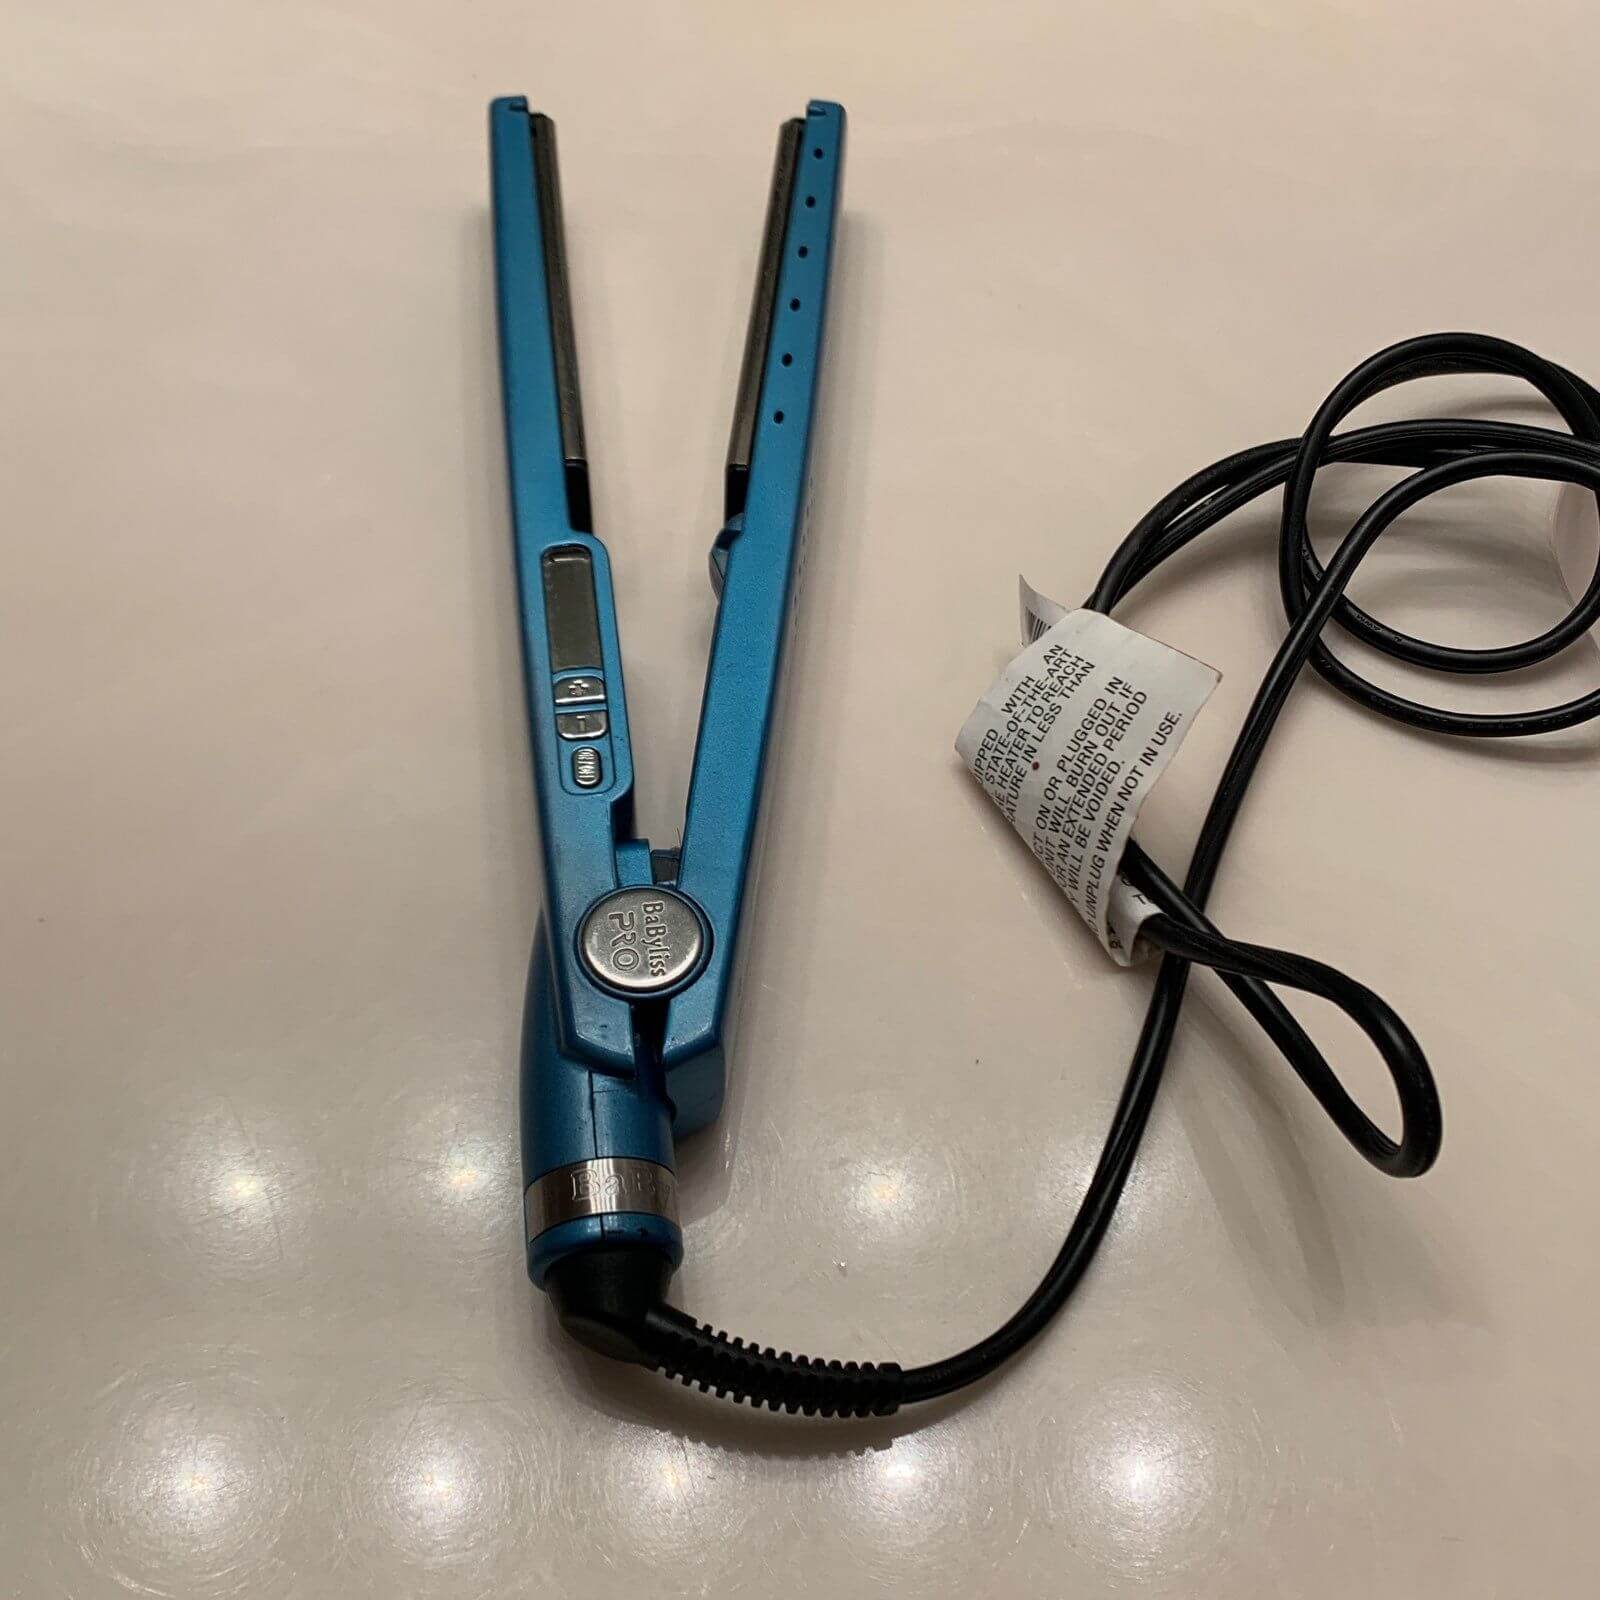 How to Clean Flat Iron with Vinegar